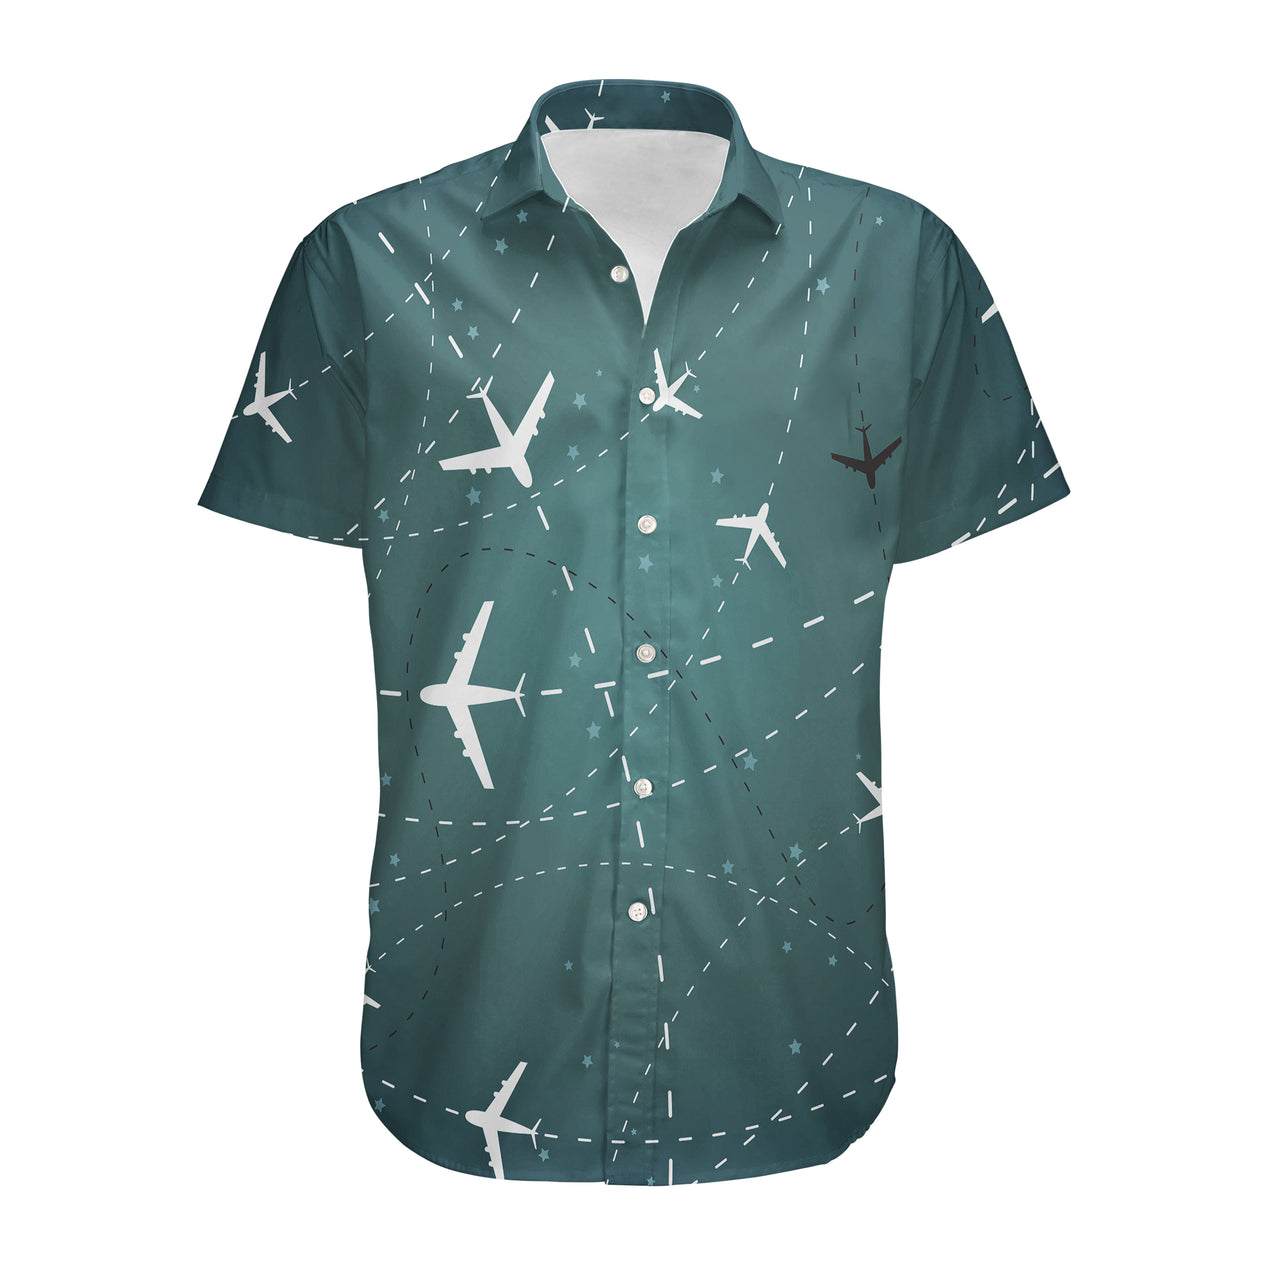 Travelling with Aircraft (Green) Designed 3D Shirts